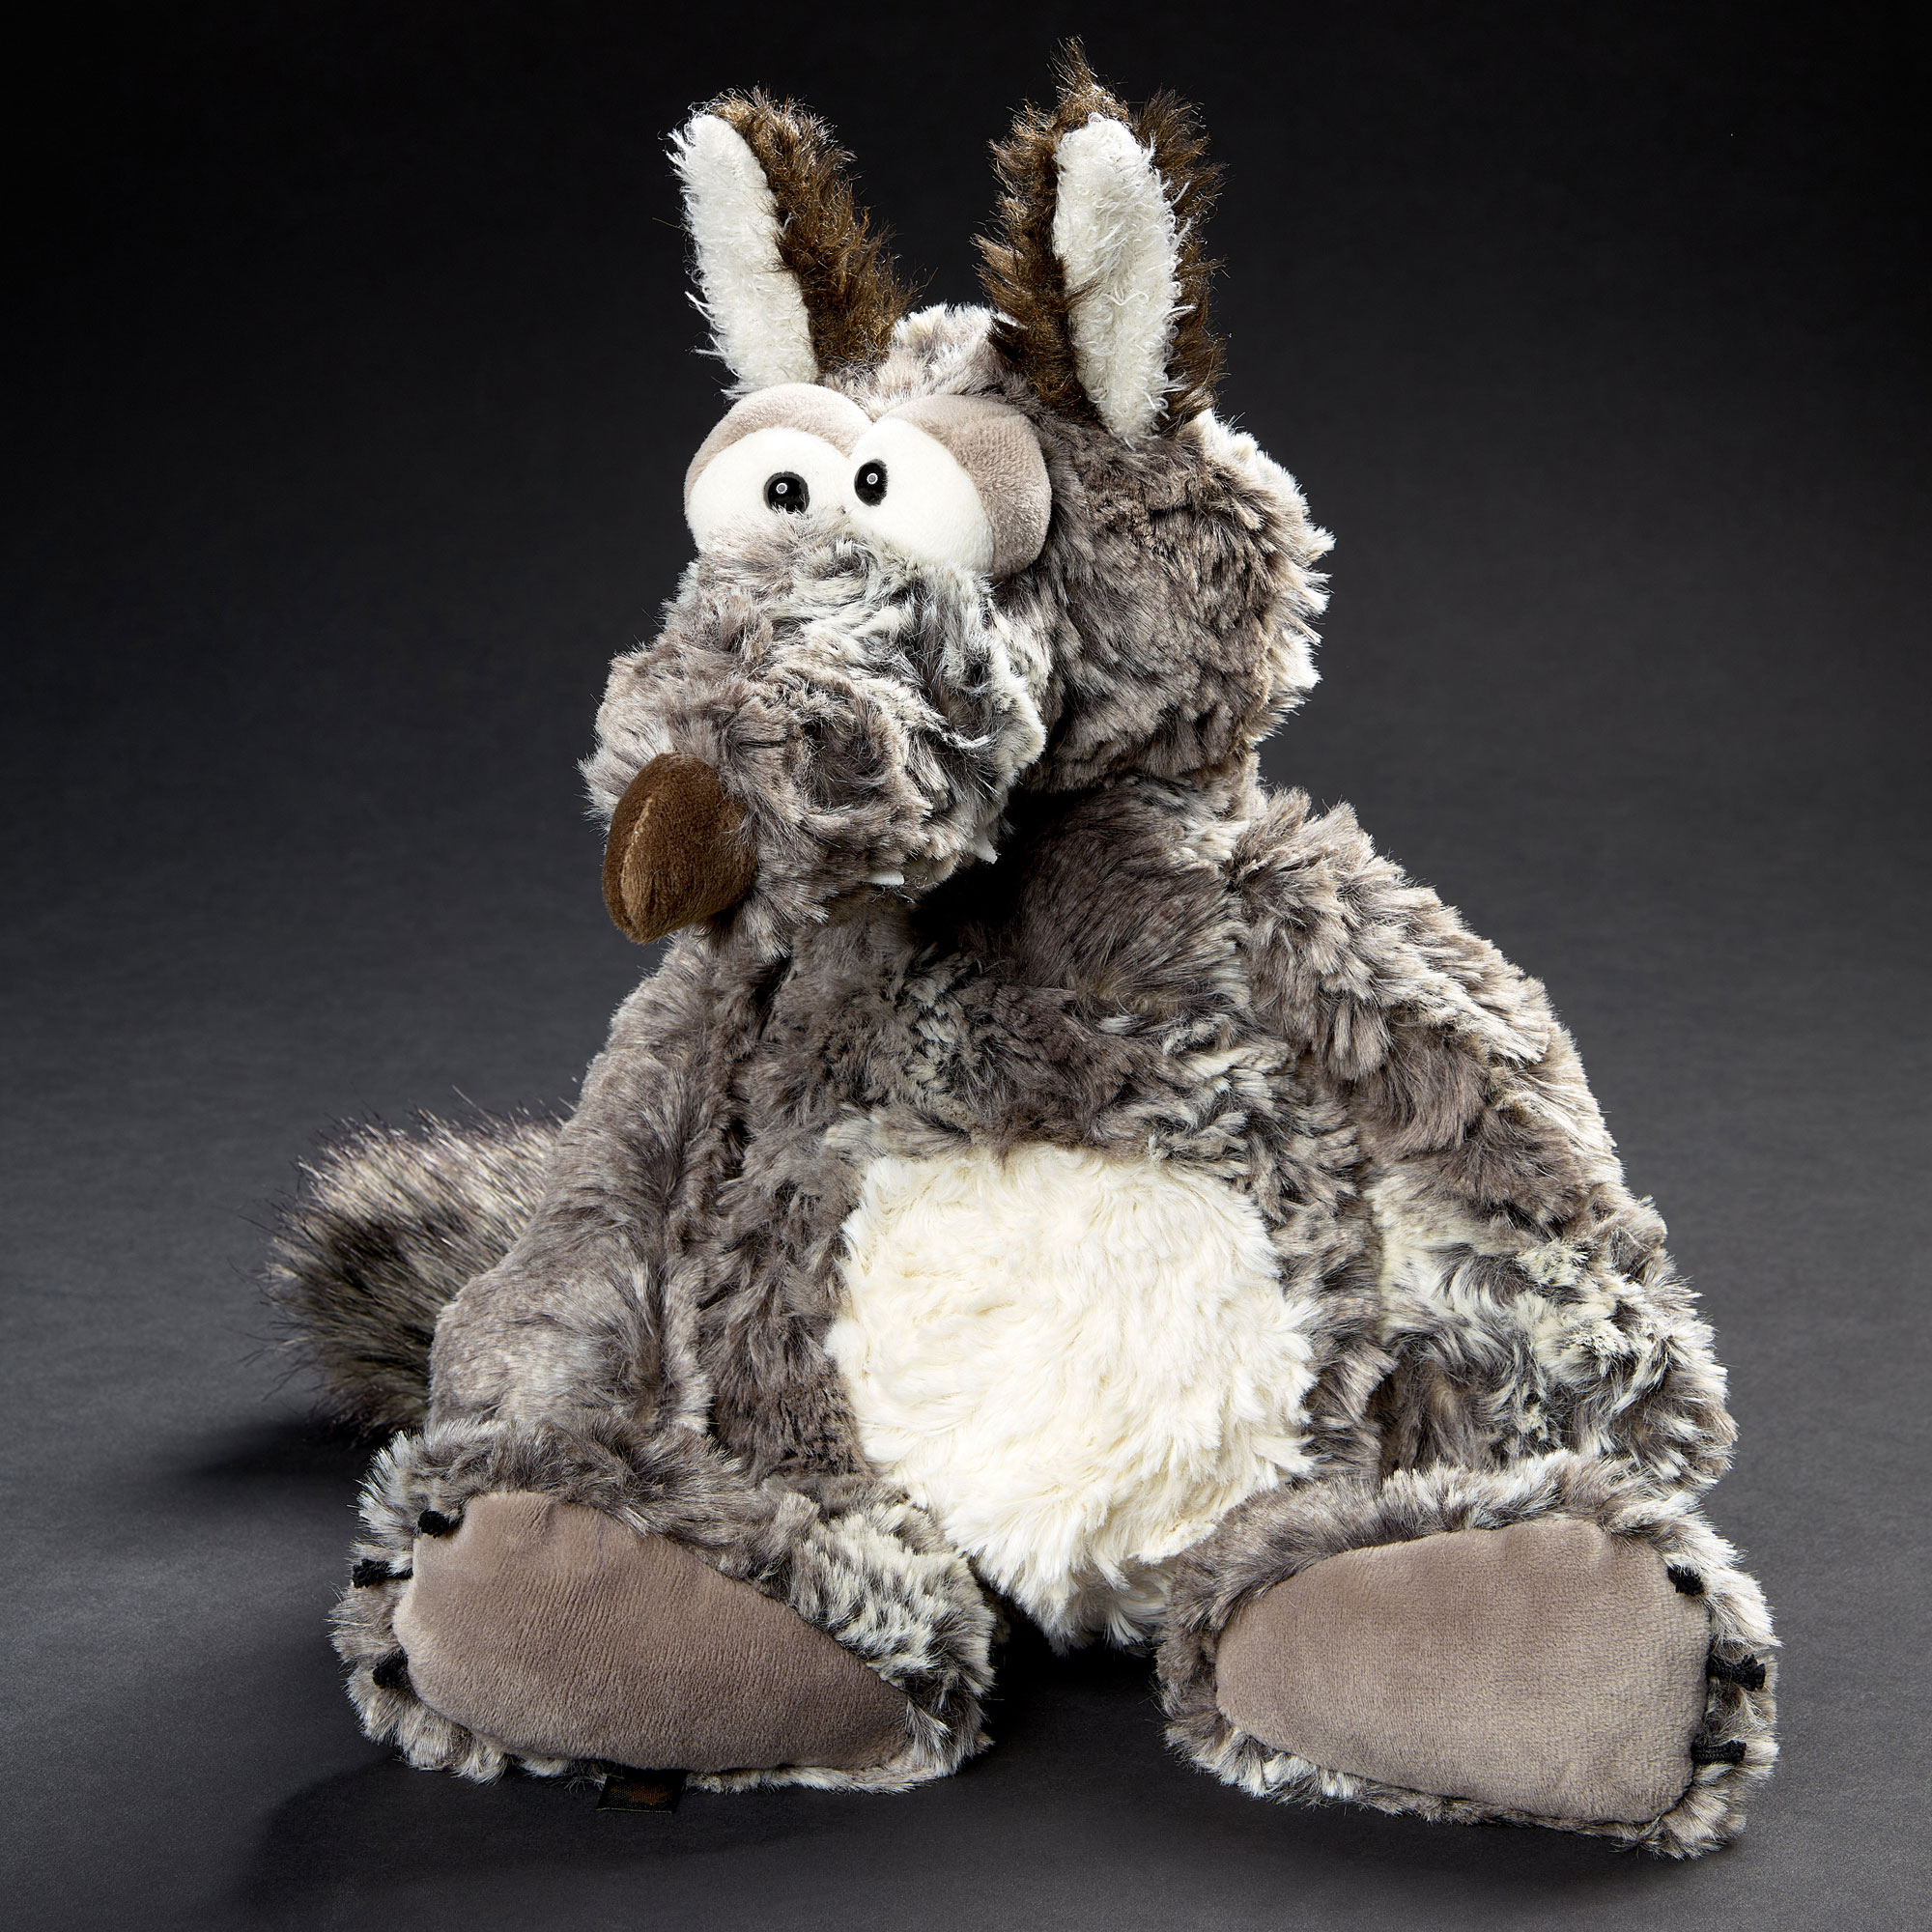 Plush toy wolf Grimm's Gangster, Beasts collection